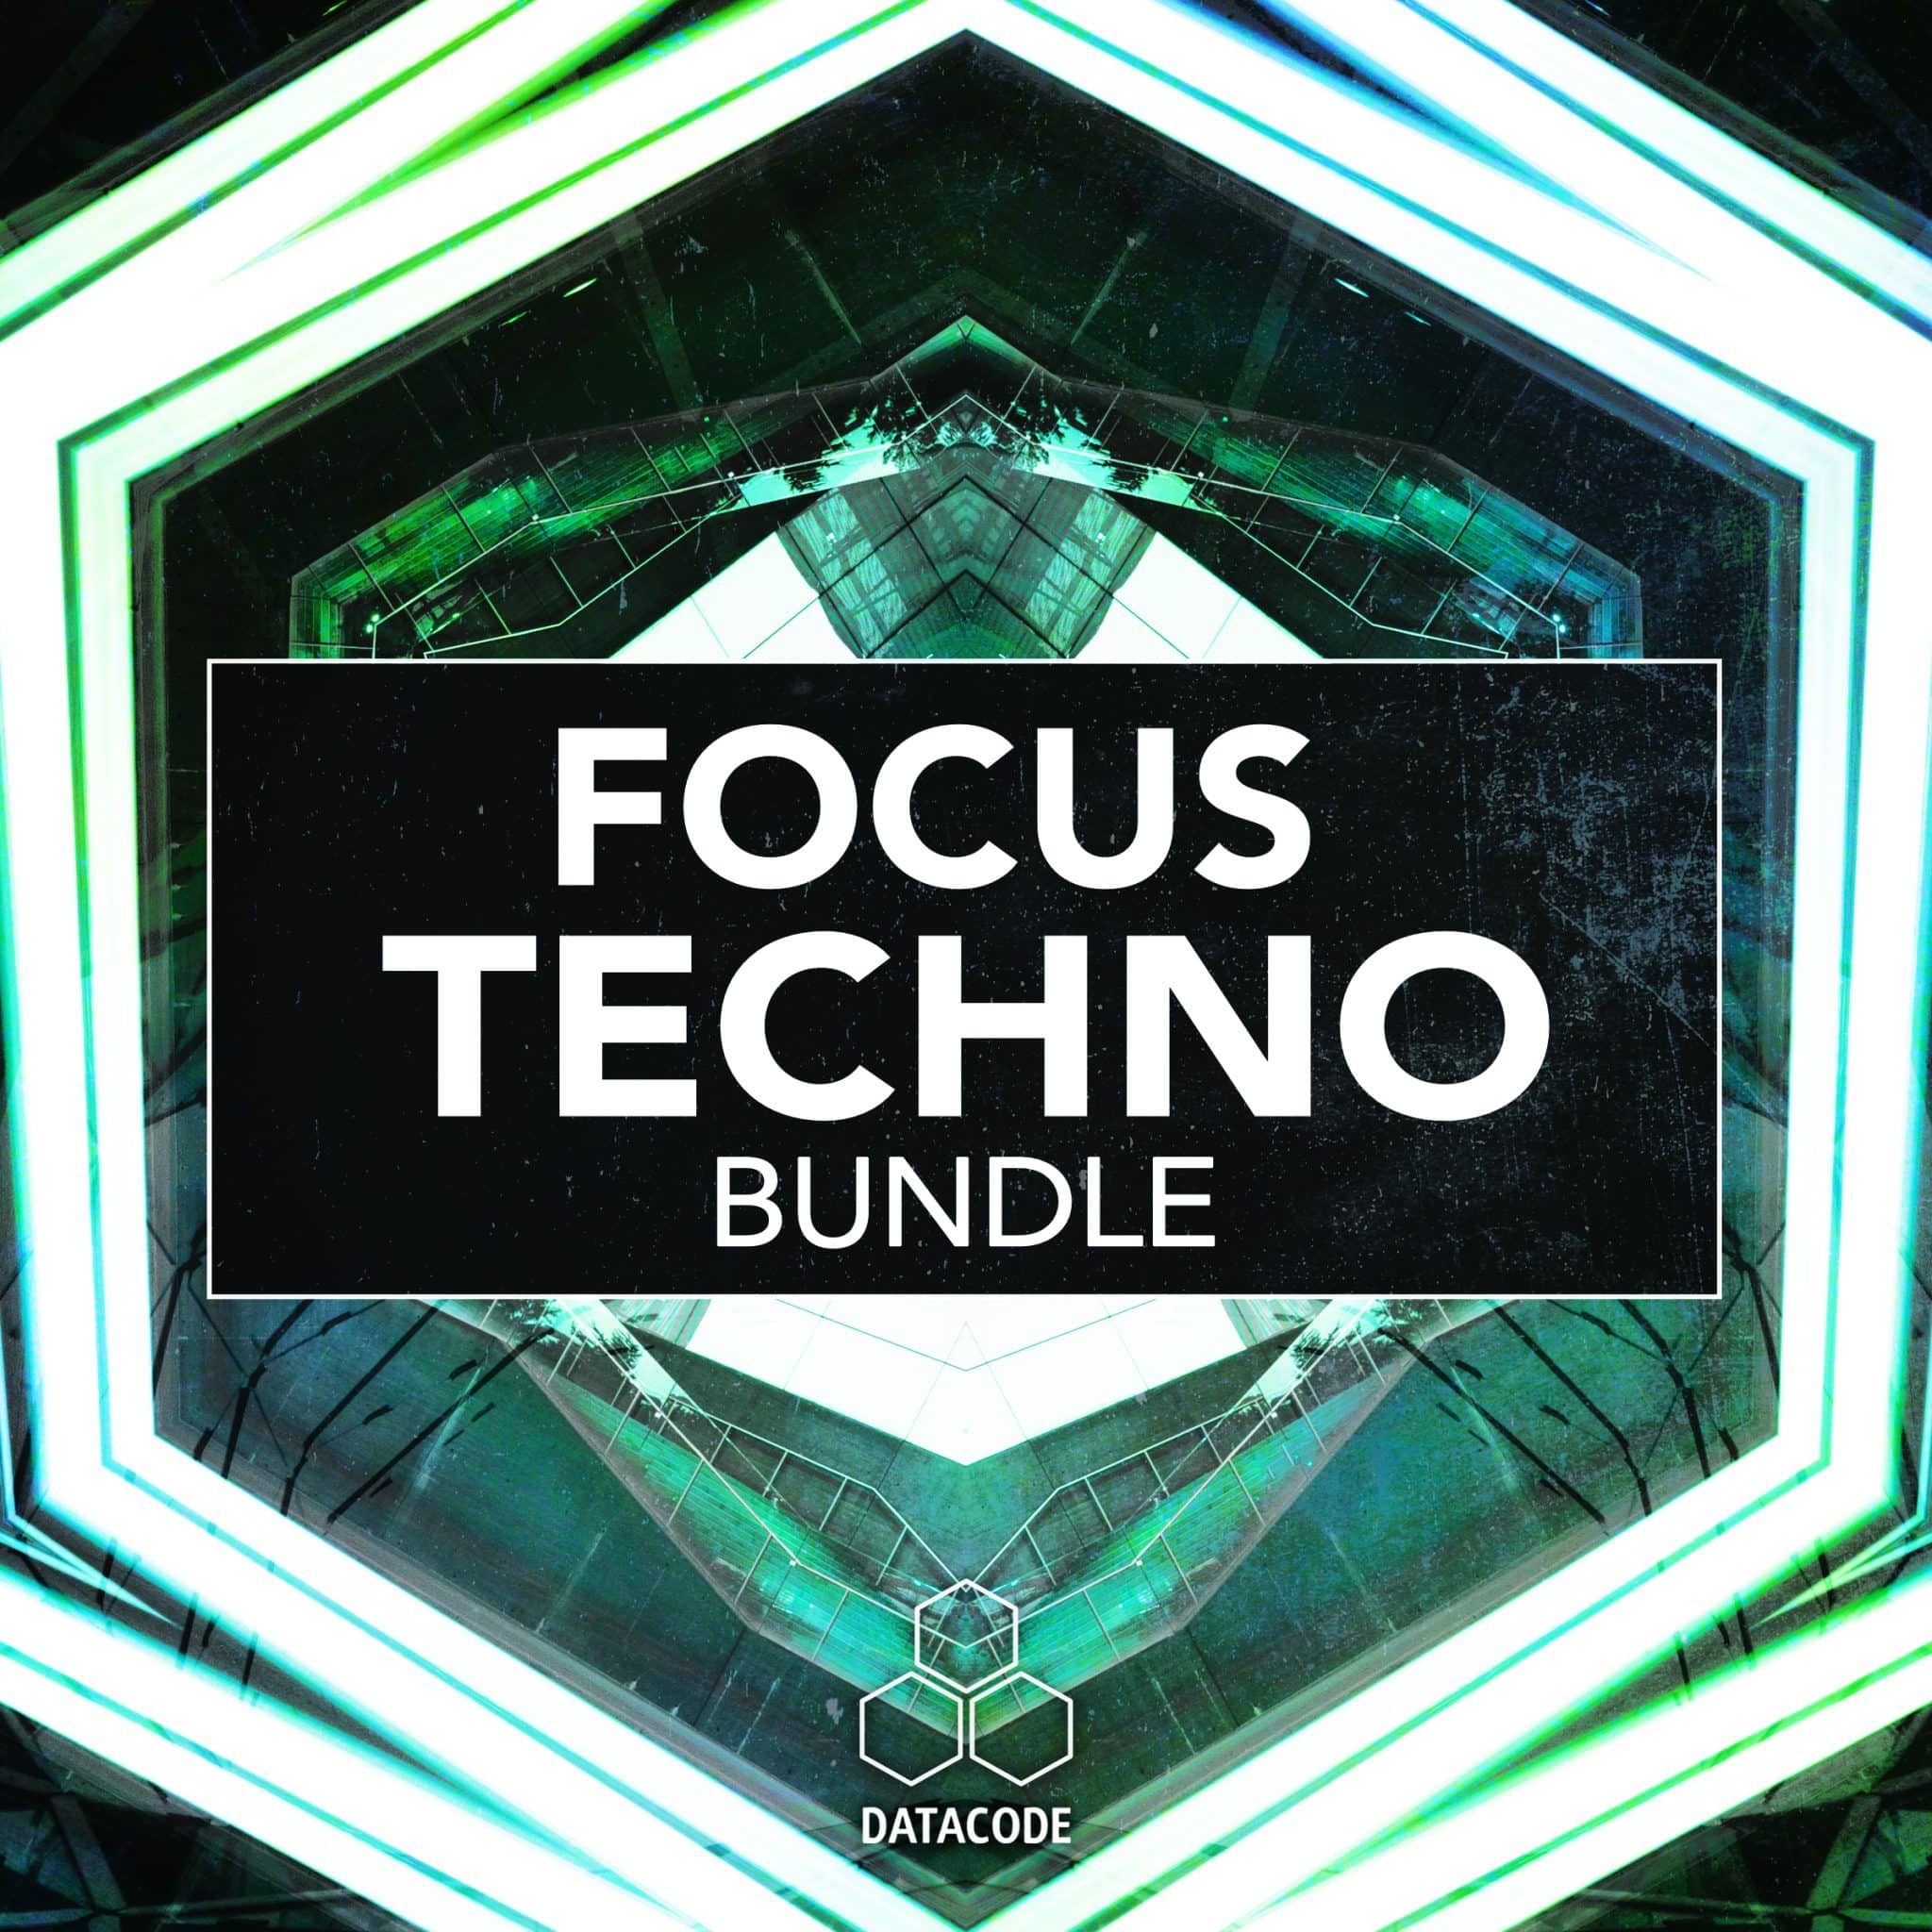 87% off “FOCUS Techno Bundle” by Datacode